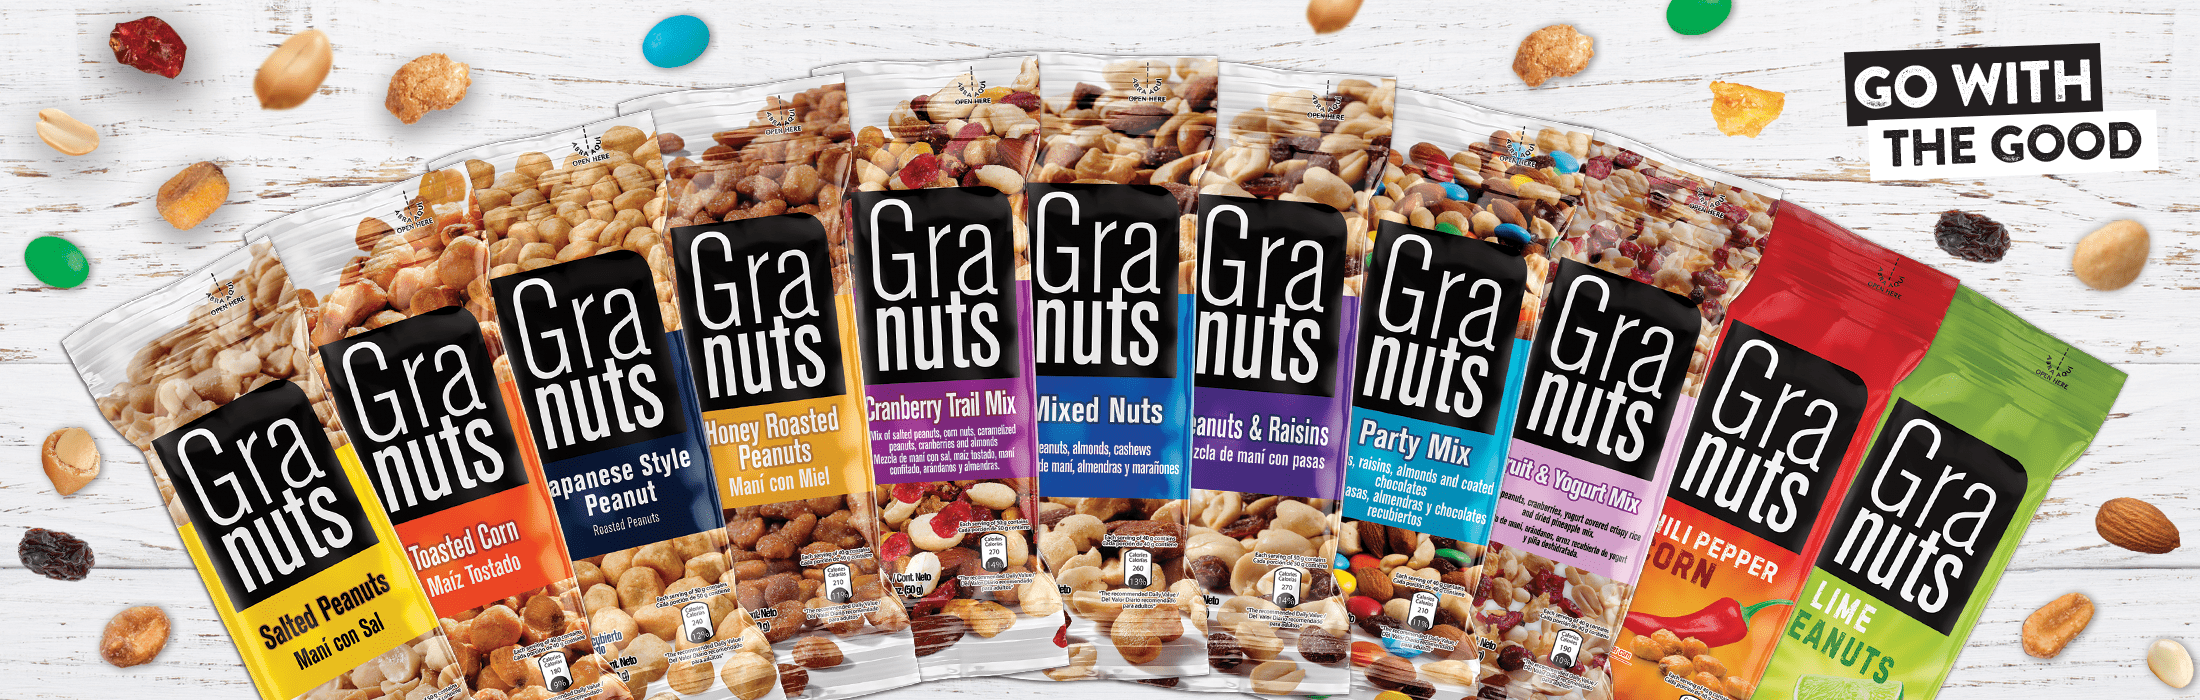 granuts banner main products- go with the good